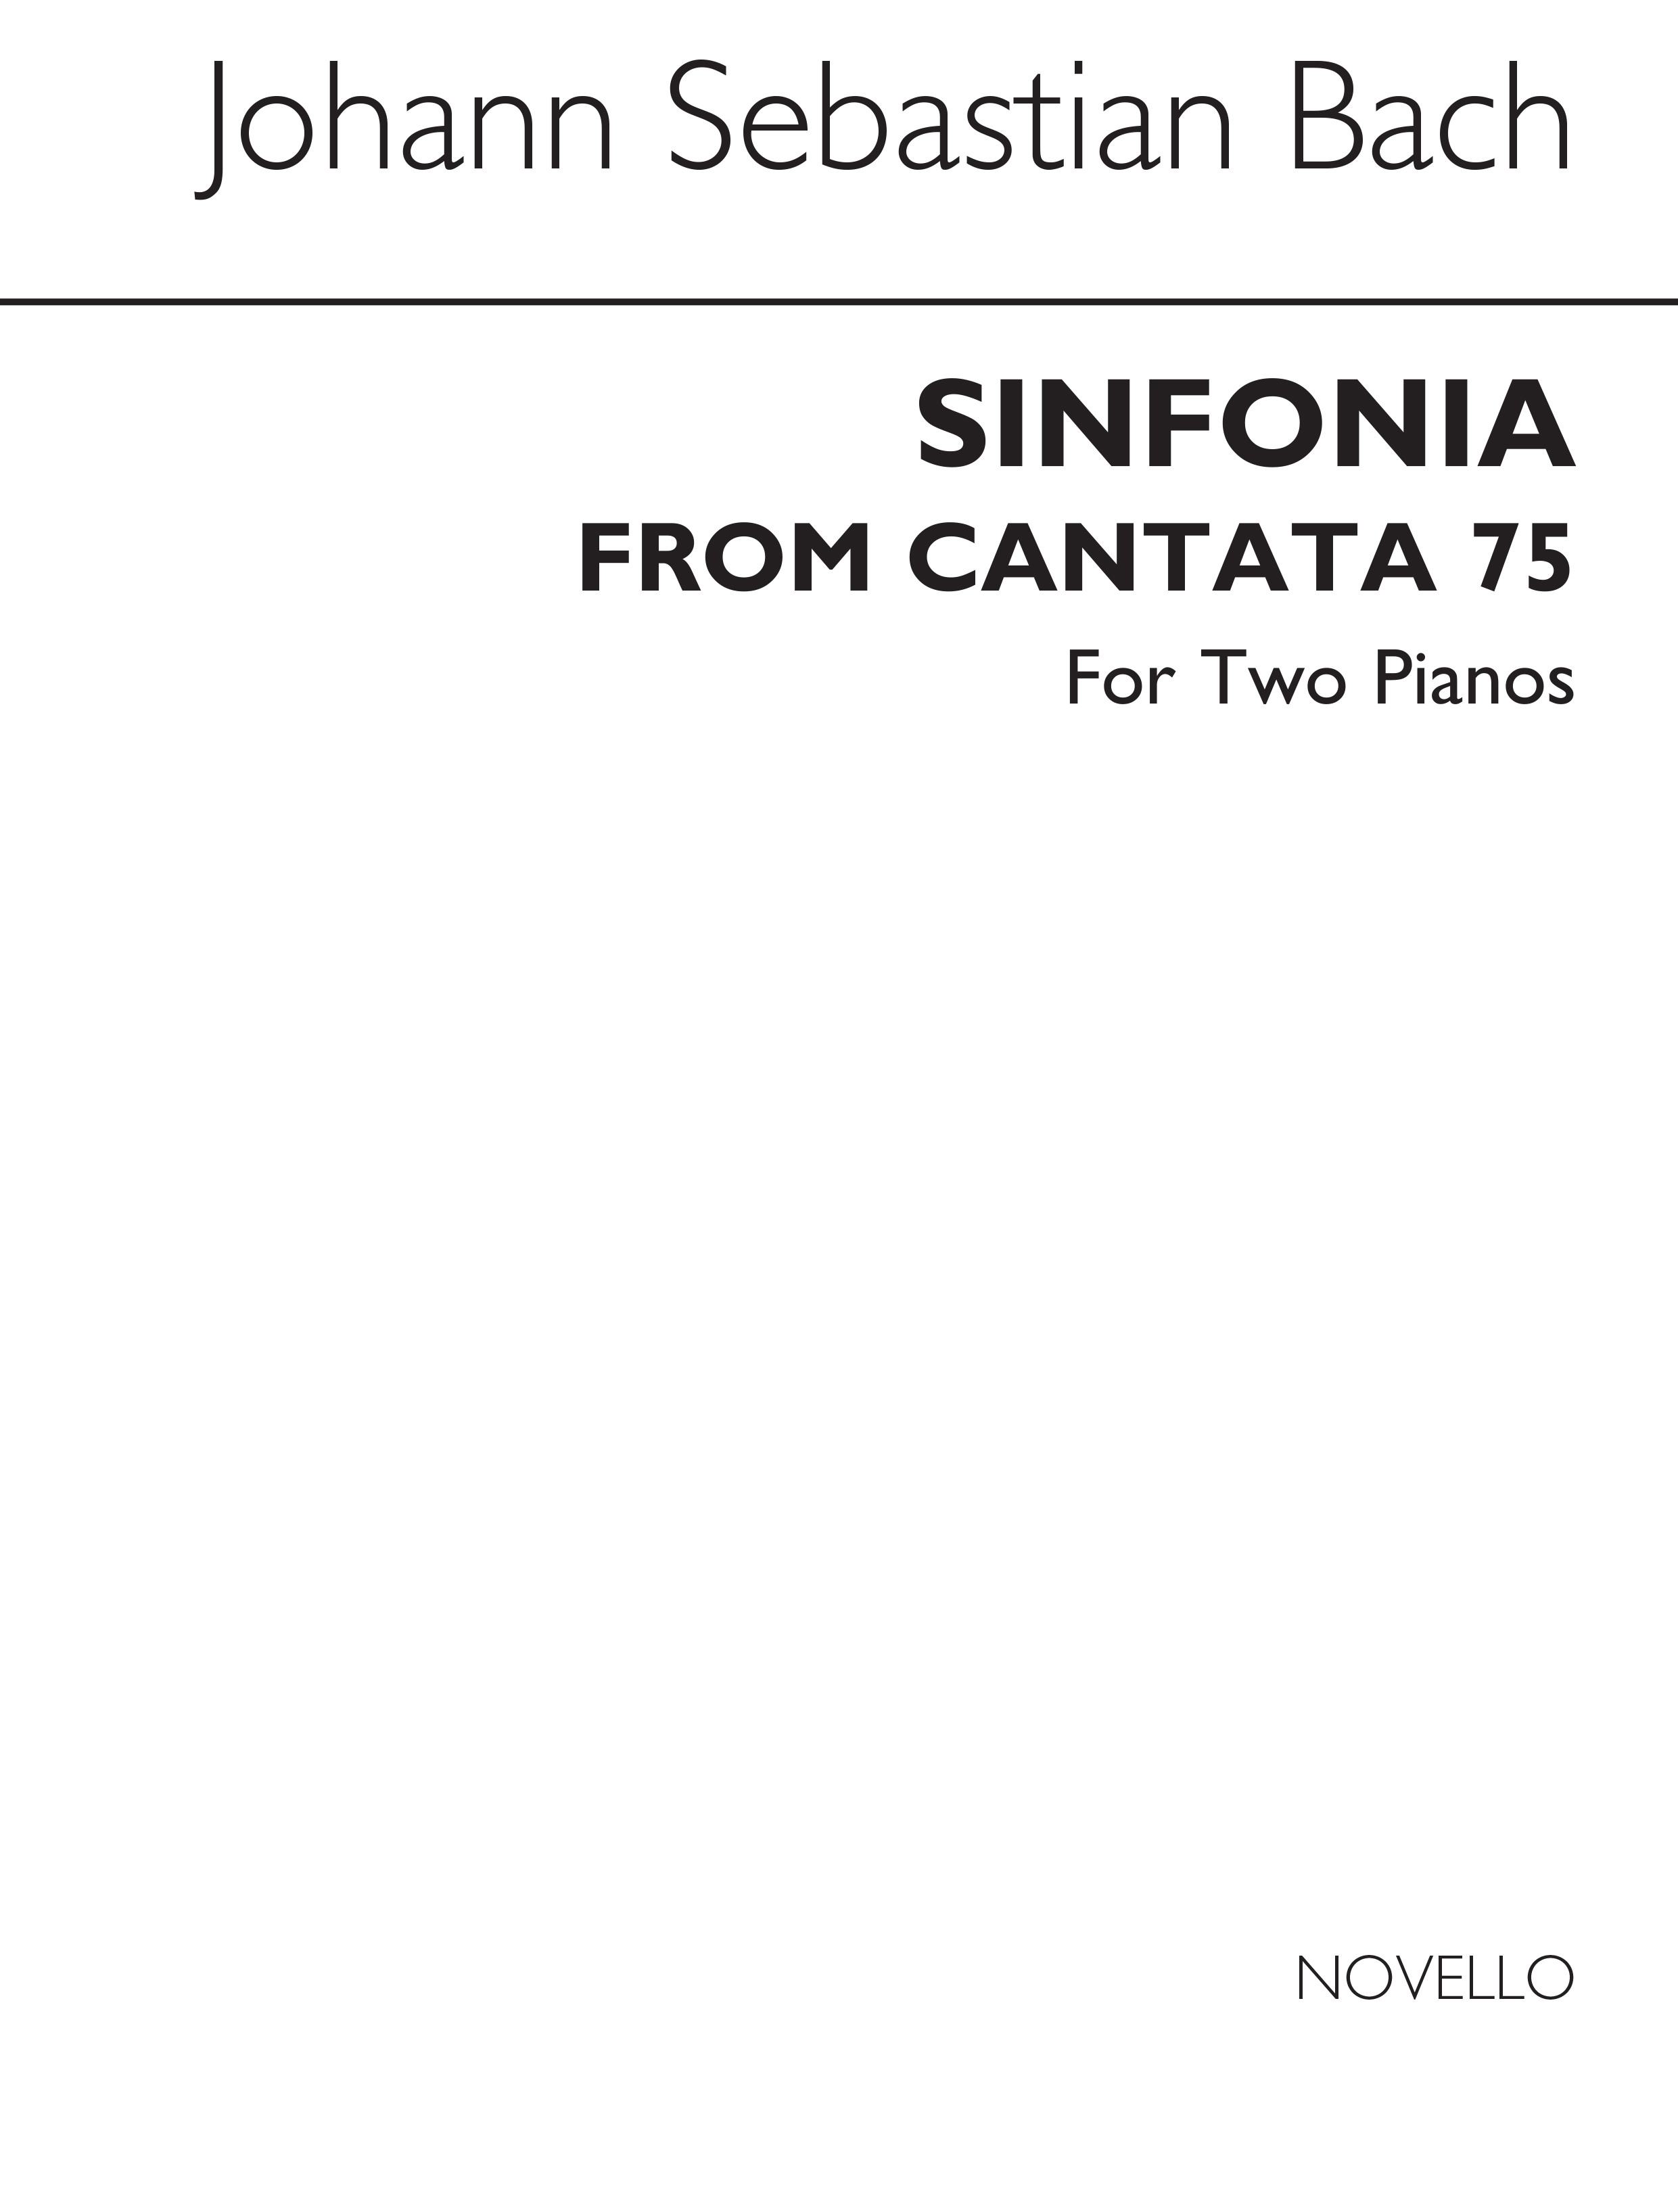 J.S.Bach: Sinfonia From Cantata 75 (Walter Emery)